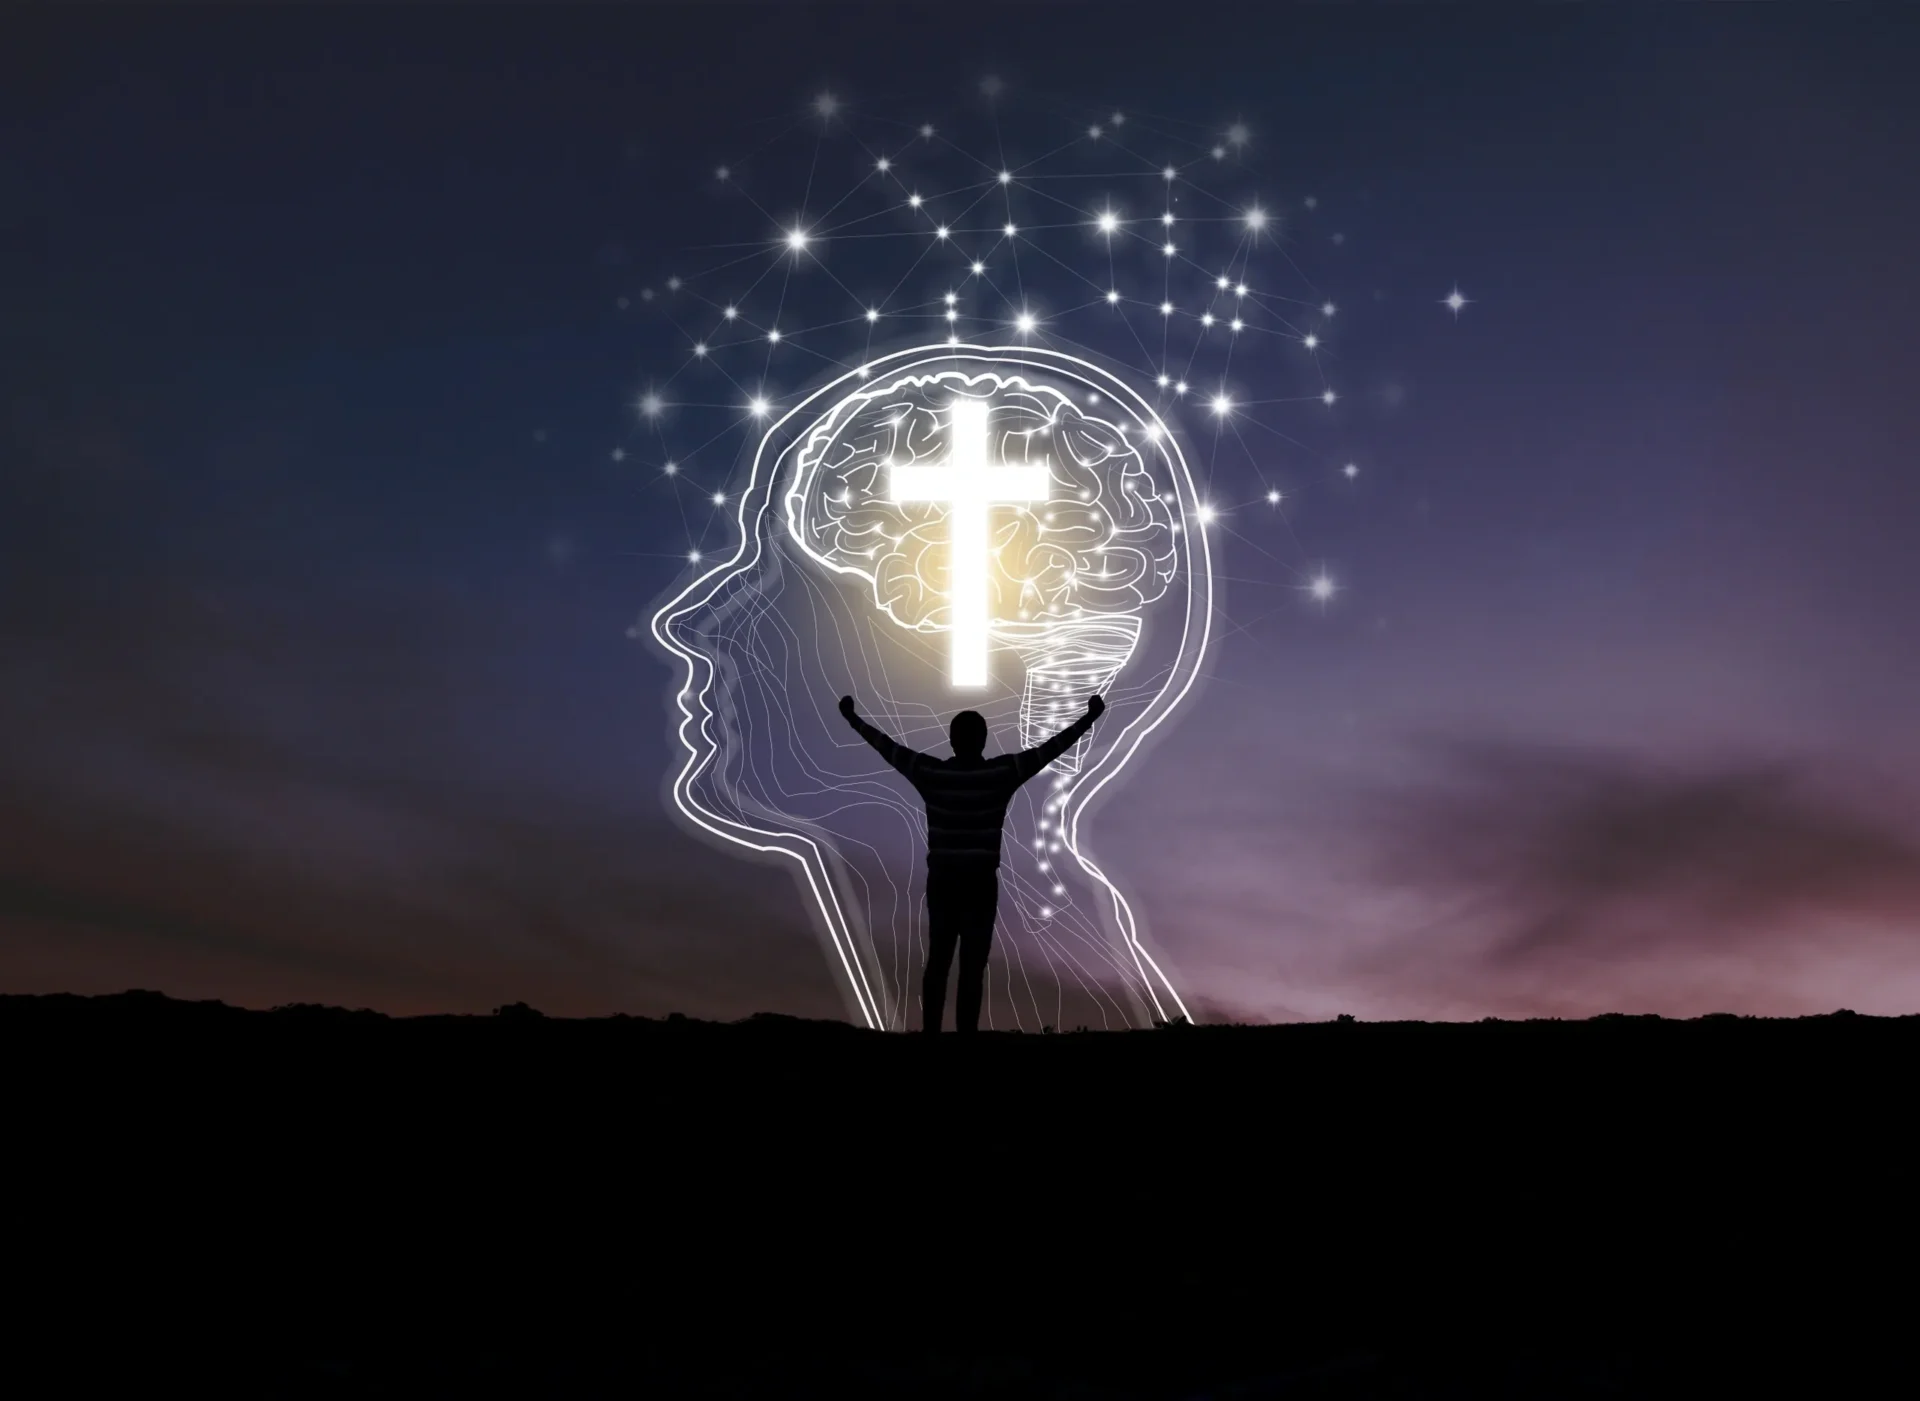 A person standing in front of a head with a cross on it.